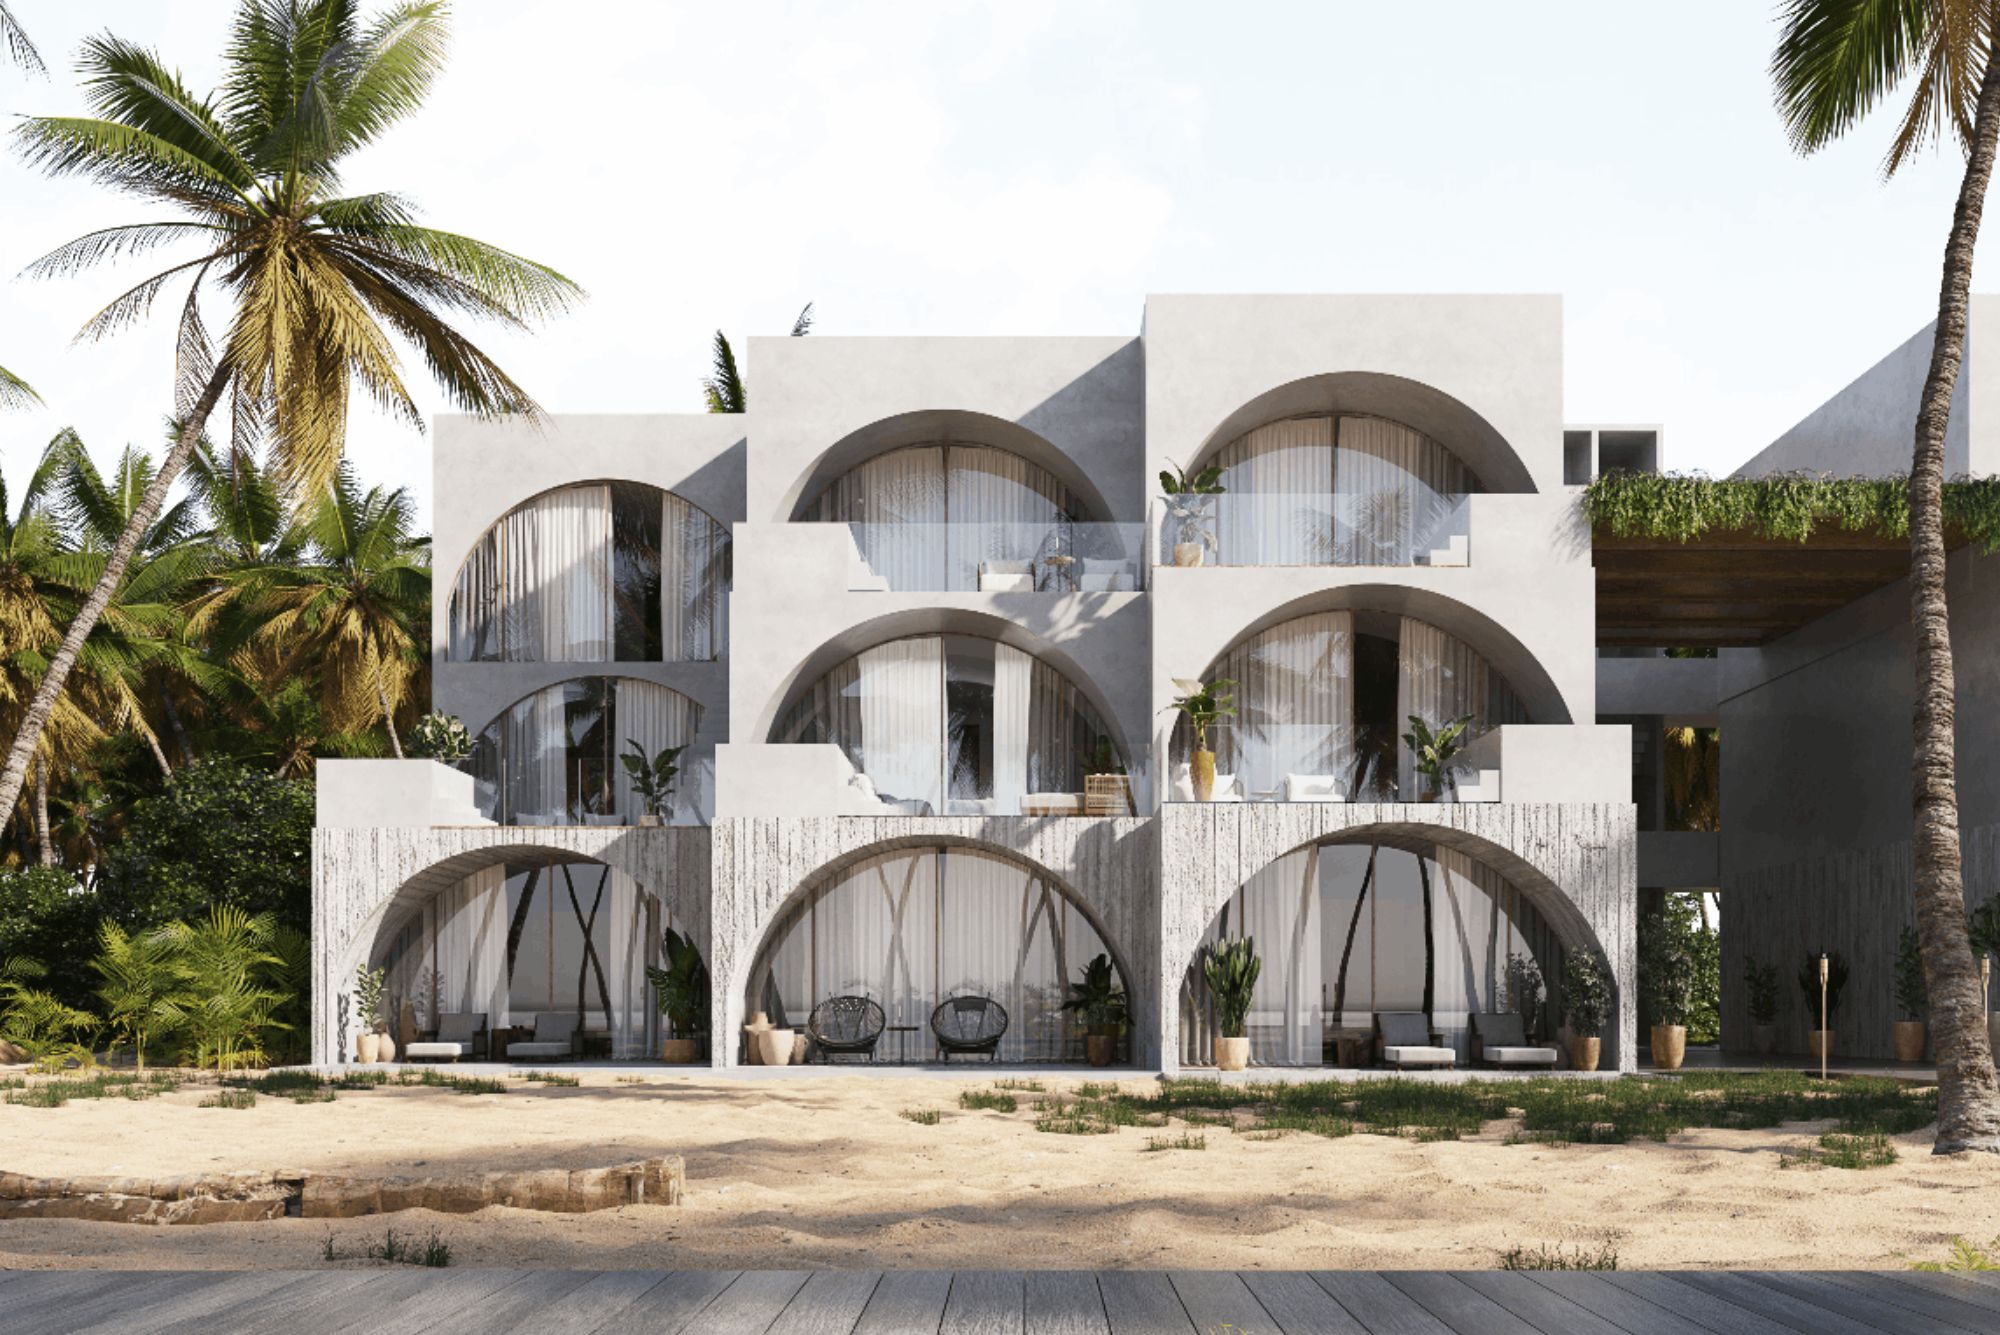 OCN Resorts & Residences will soon offer sustainable luxury stays in Mexico’s Puerto Escondido